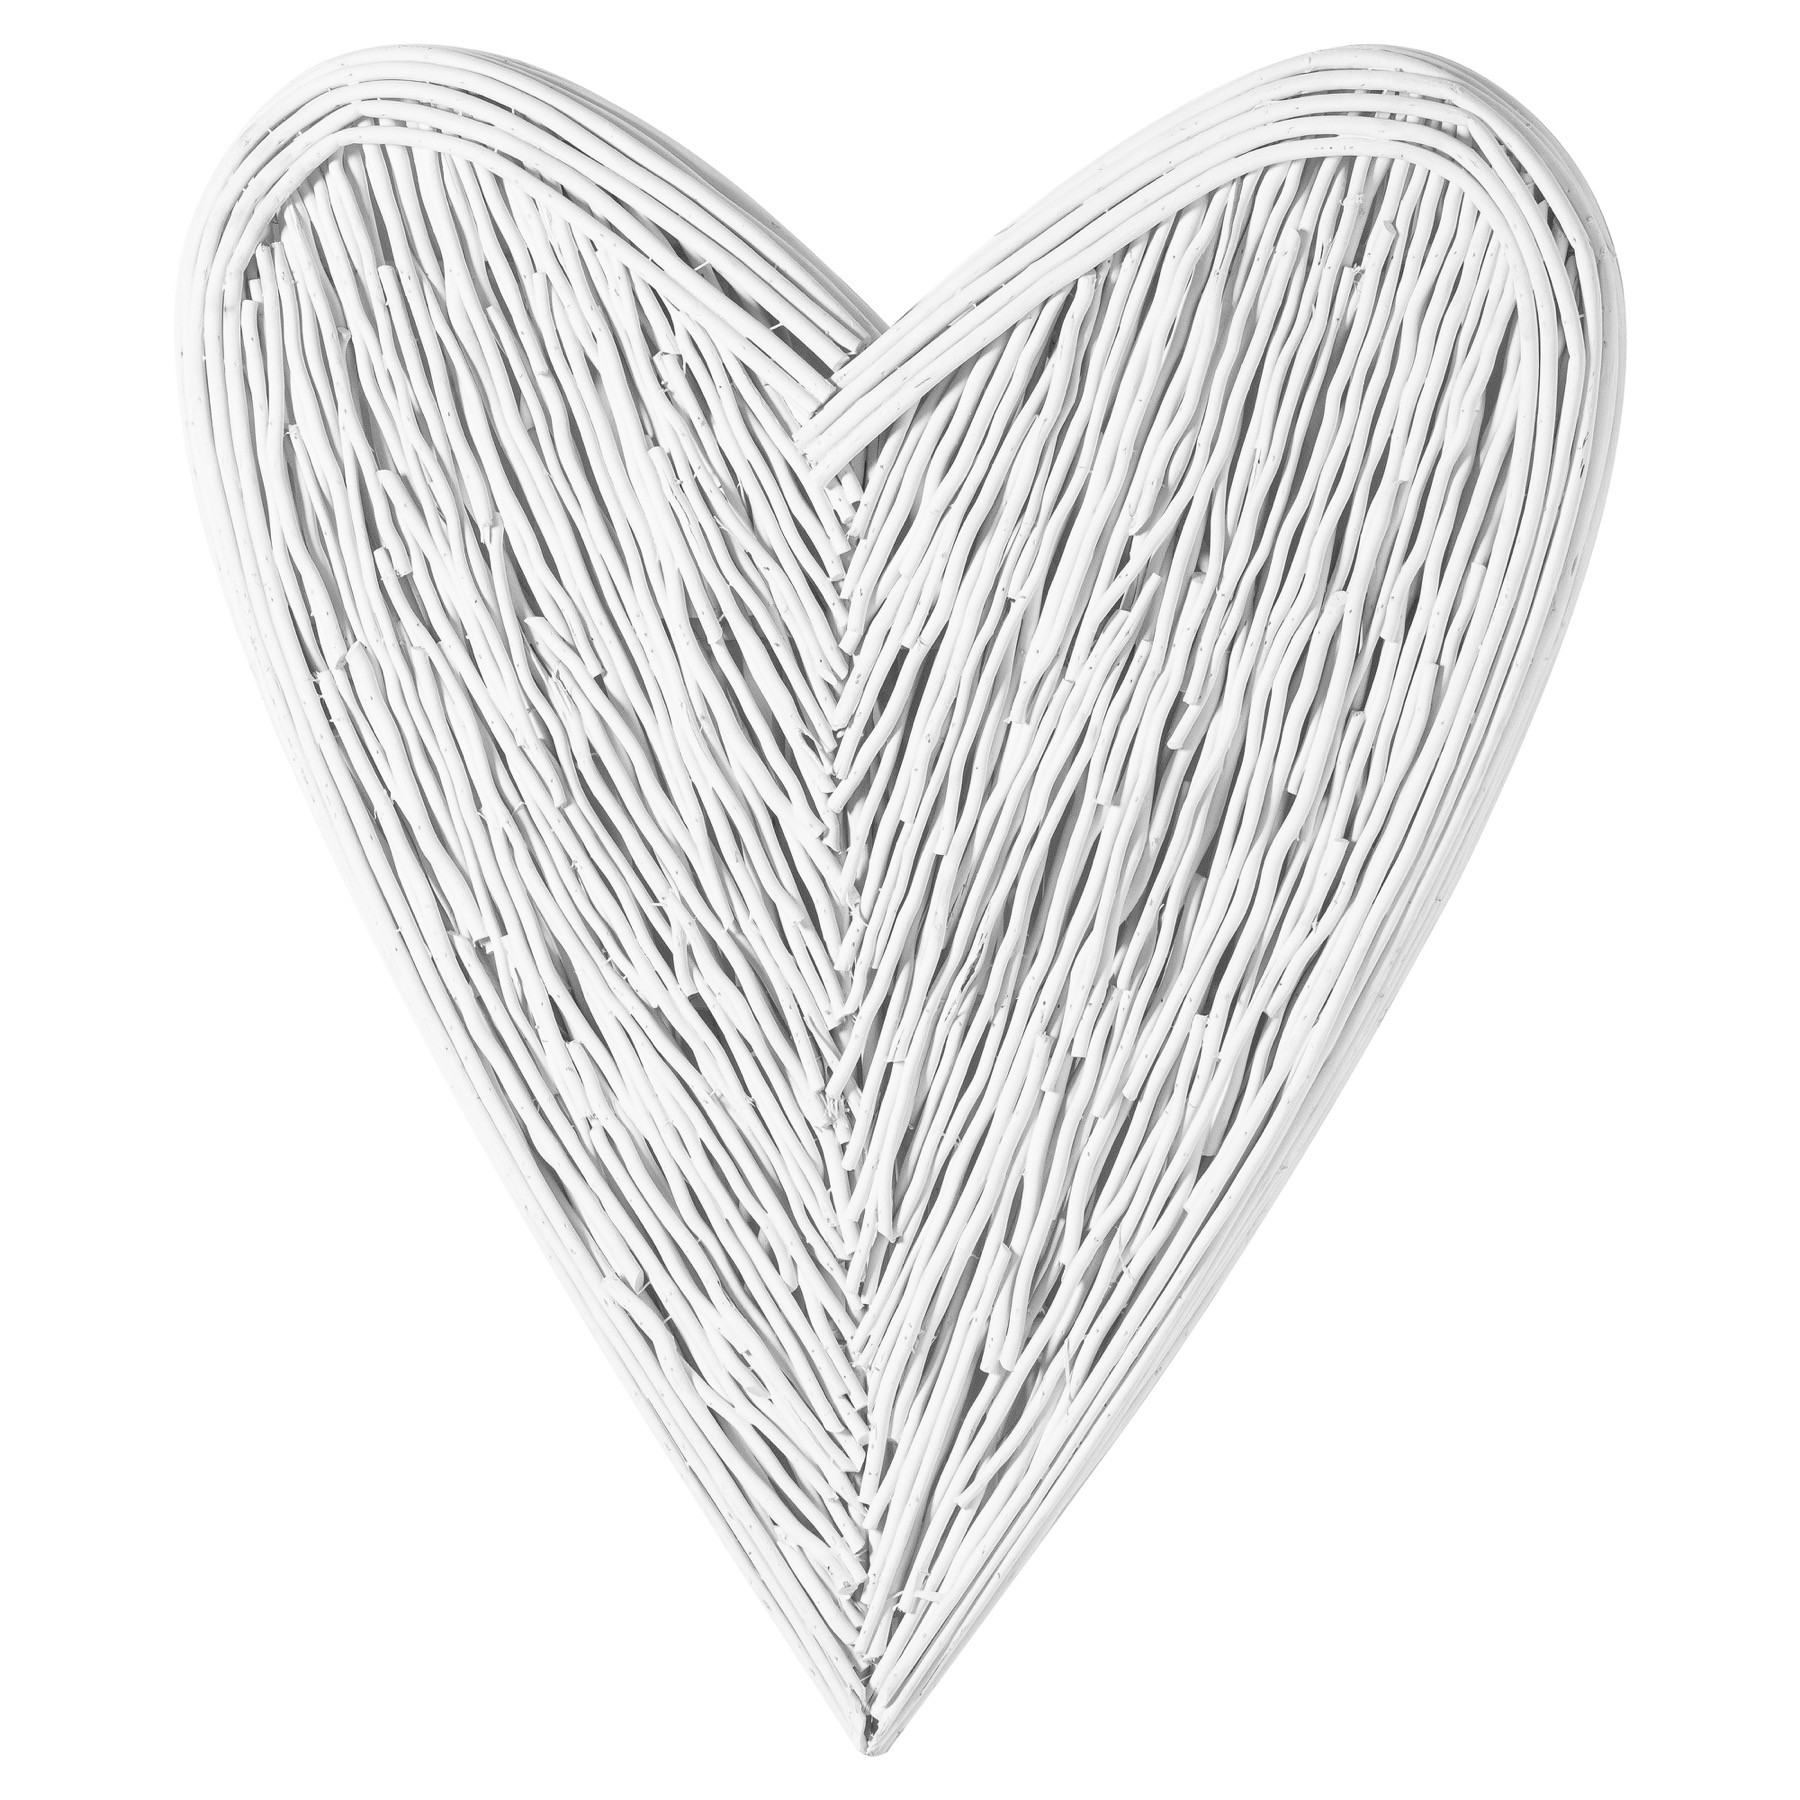 Large White Willow Branch Heart - Image 1